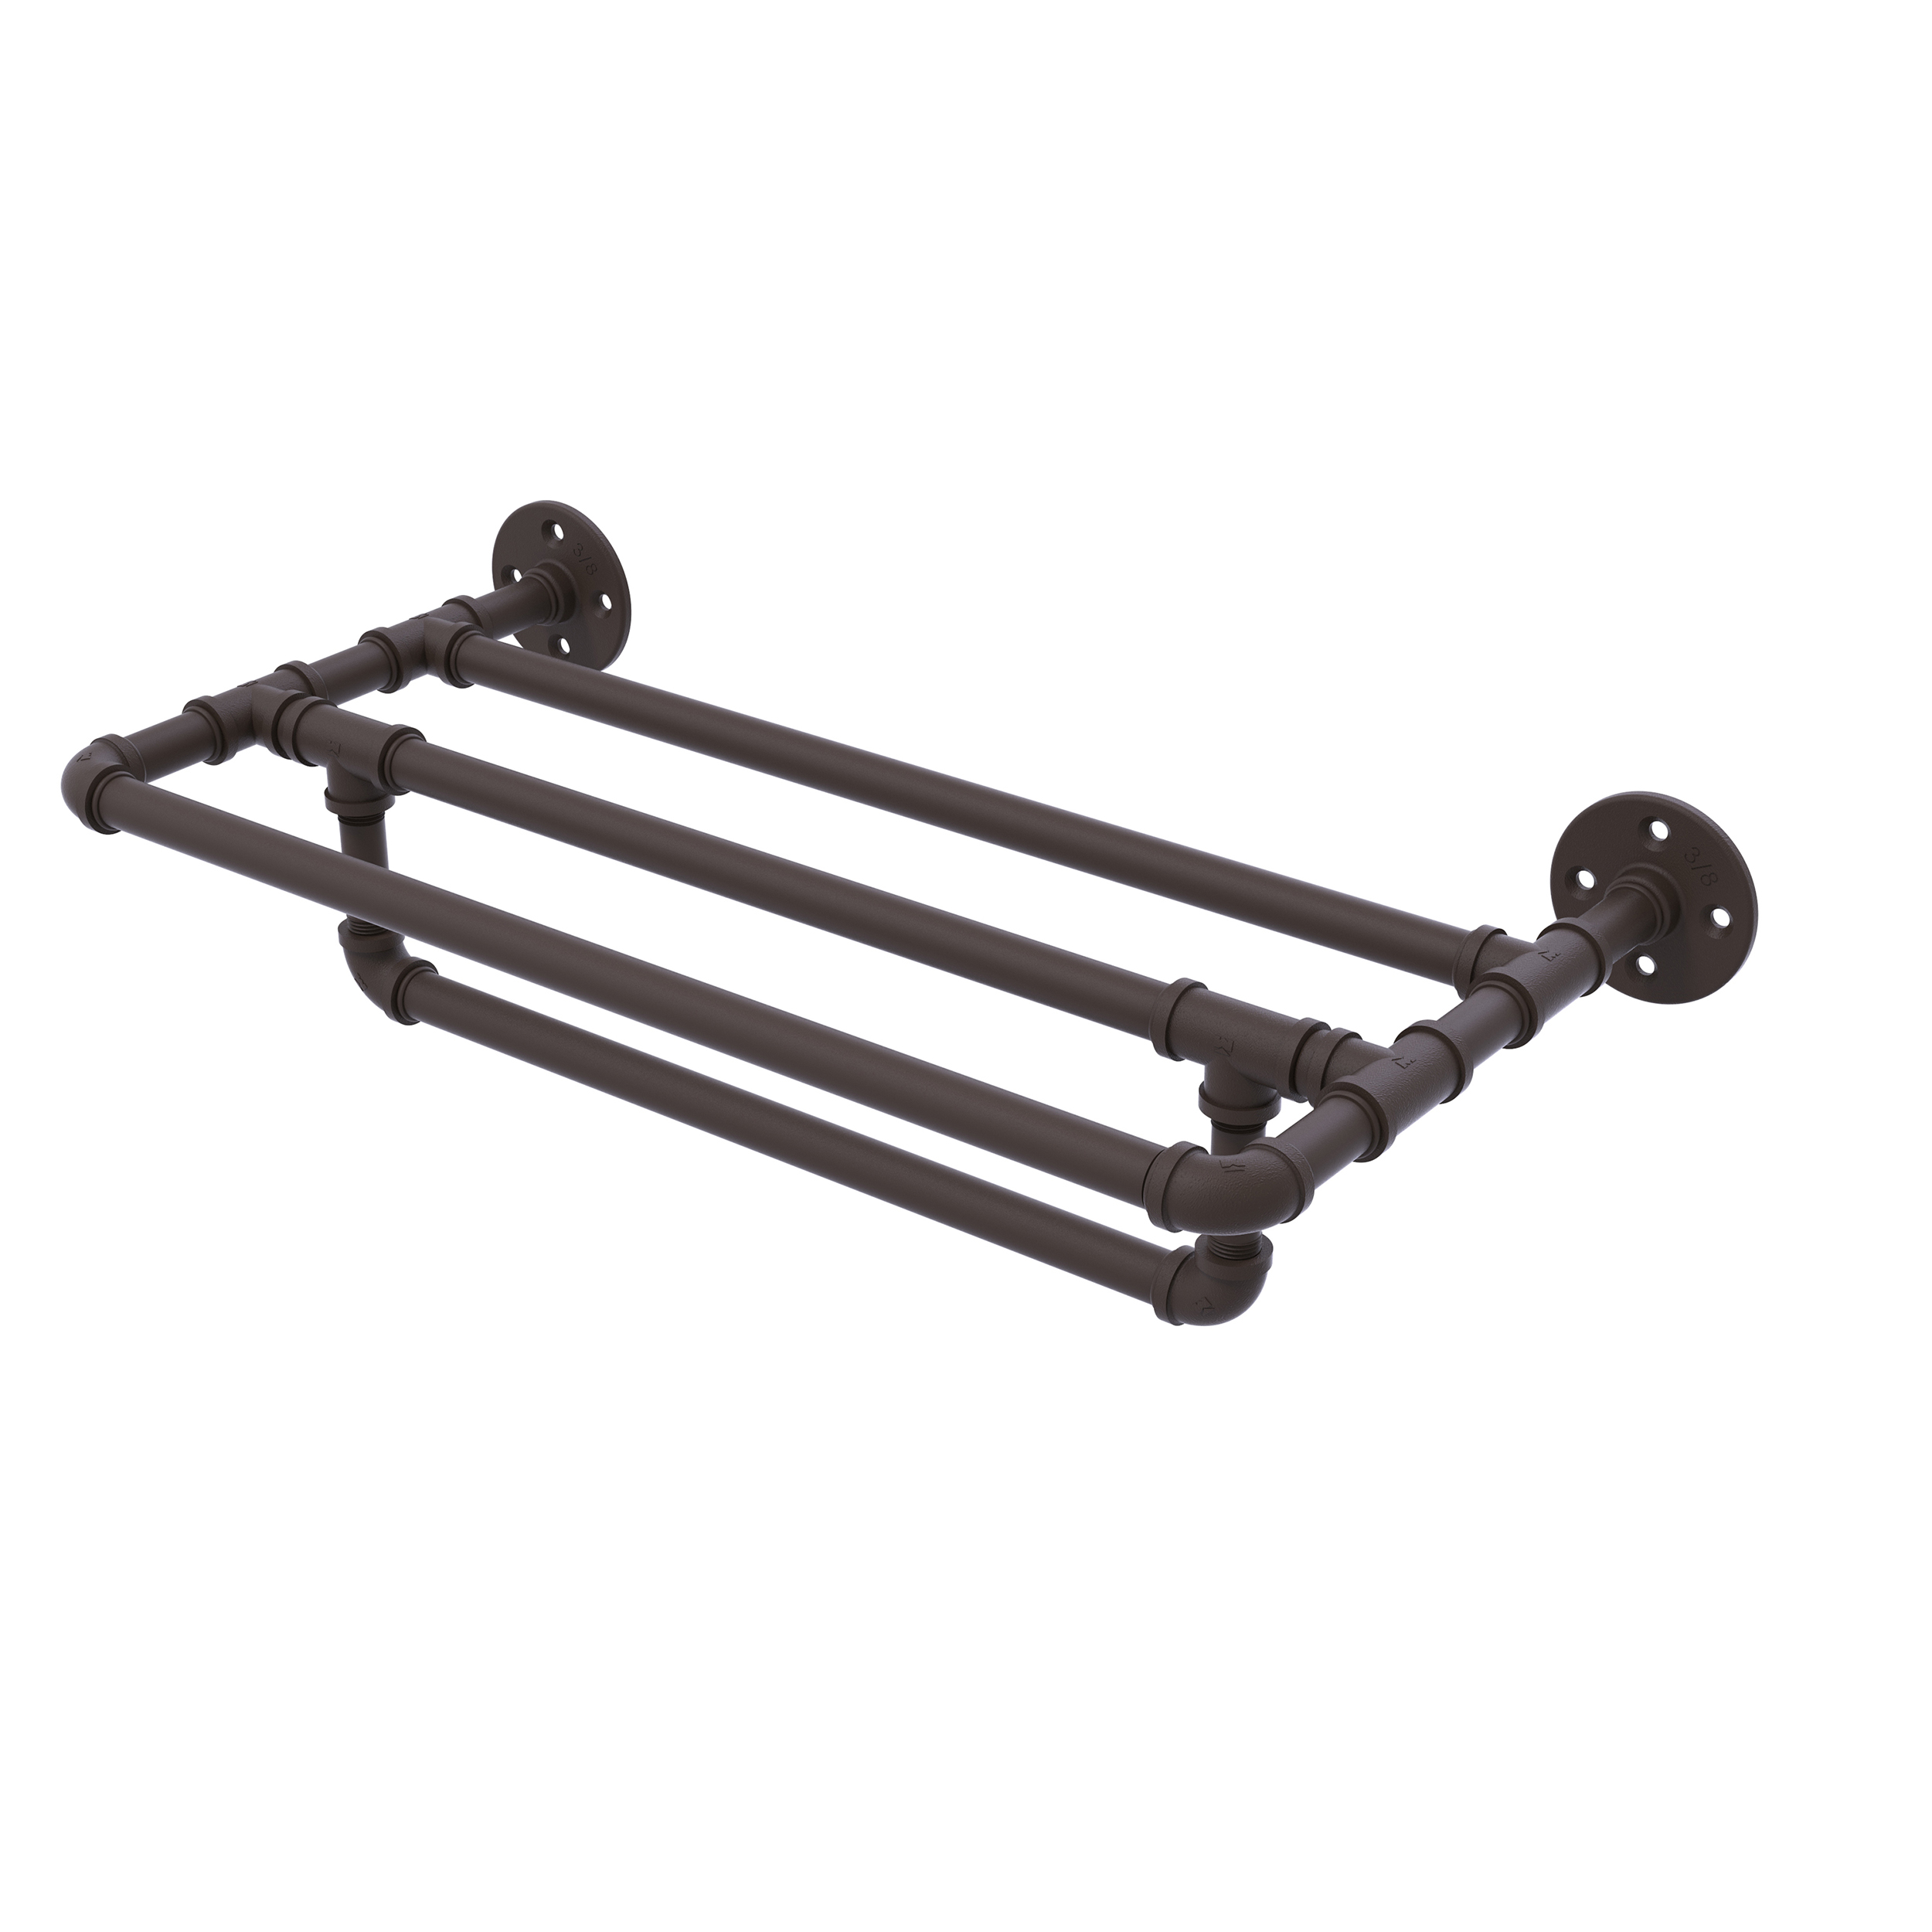 18" Wall Mounted Towel Shelf With Towel Bar, Oil Rubbed Bronze Finish